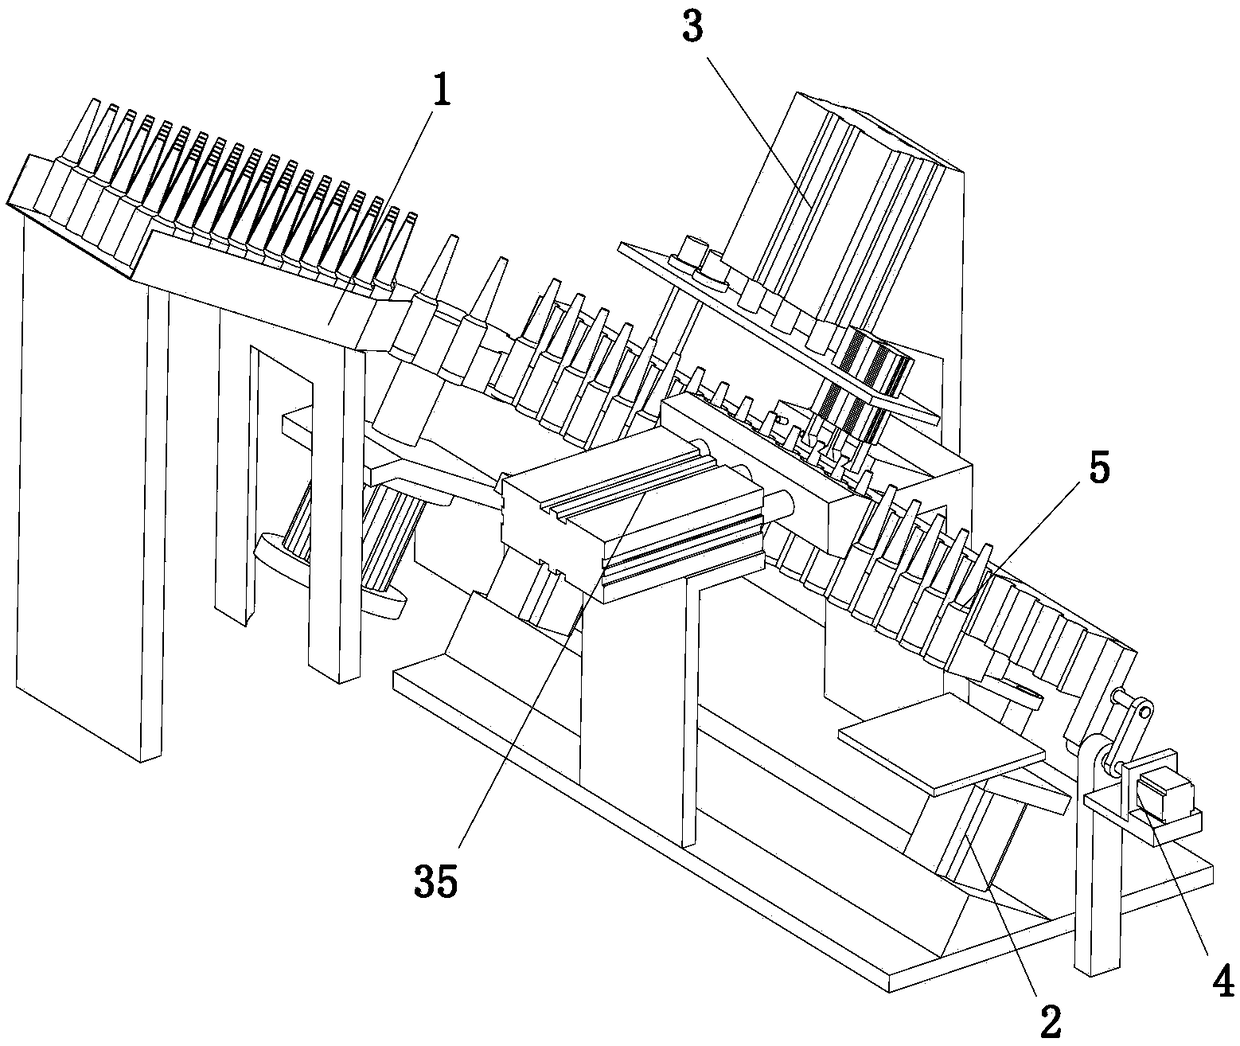 Sealing device for ampoule bottles